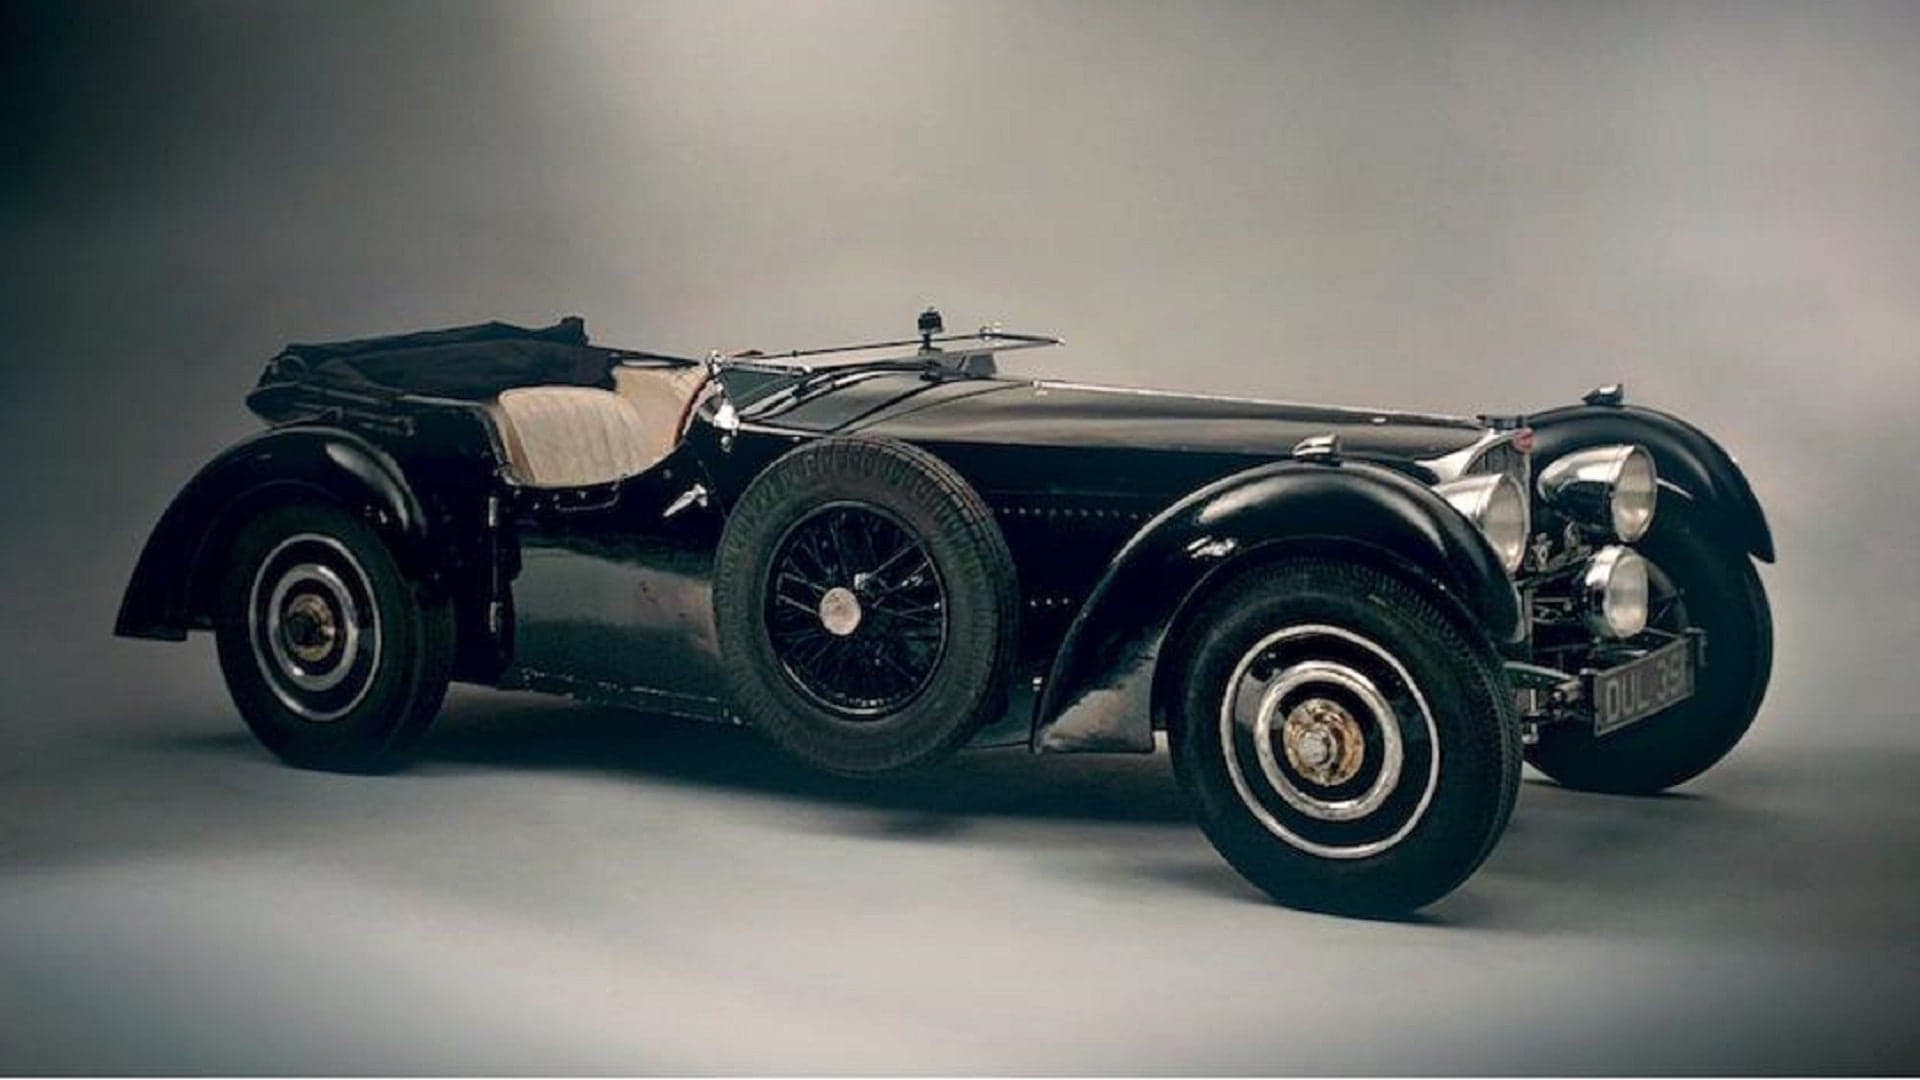 This Masterpiece Bugatti Has Been Hidden Away for 50 Years and Now You Can Buy It